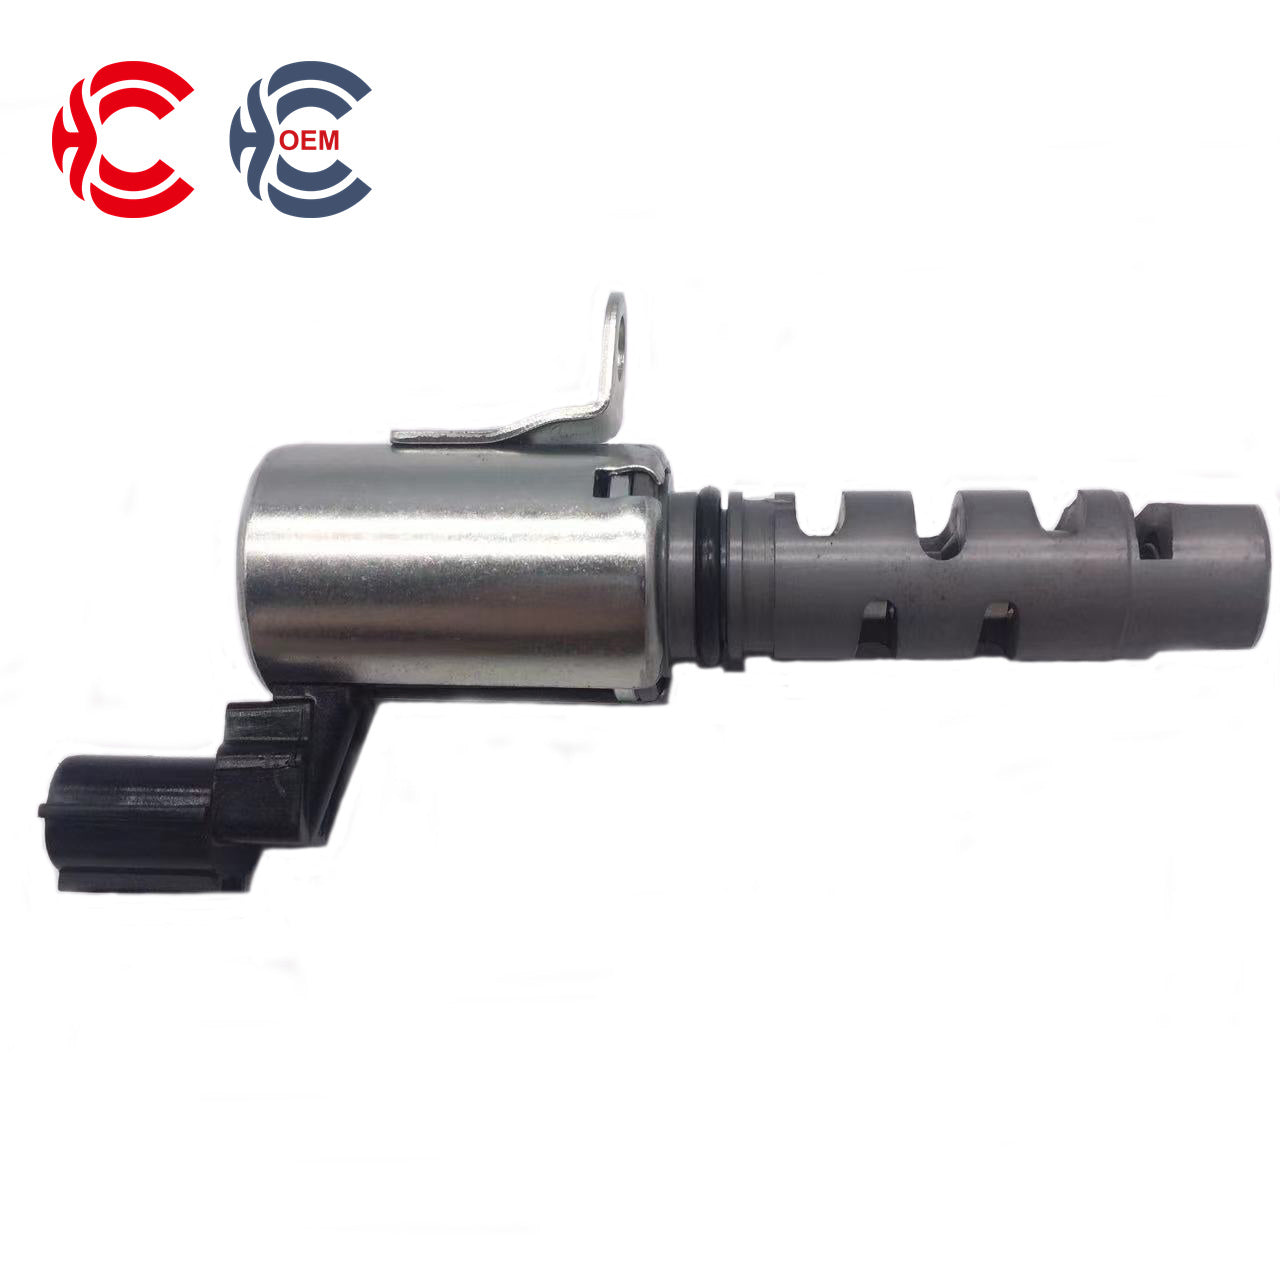 OEM: 4884695AAMaterial: ABS metalColor: black silverOrigin: Made in ChinaWeight: 300gPacking List: 1* VVT Solenoid Valve More ServiceWe can provide OEM Manufacturing serviceWe can Be your one-step solution for Auto PartsWe can provide technical scheme for you Feel Free to Contact Us, We will get back to you as soon as possible.